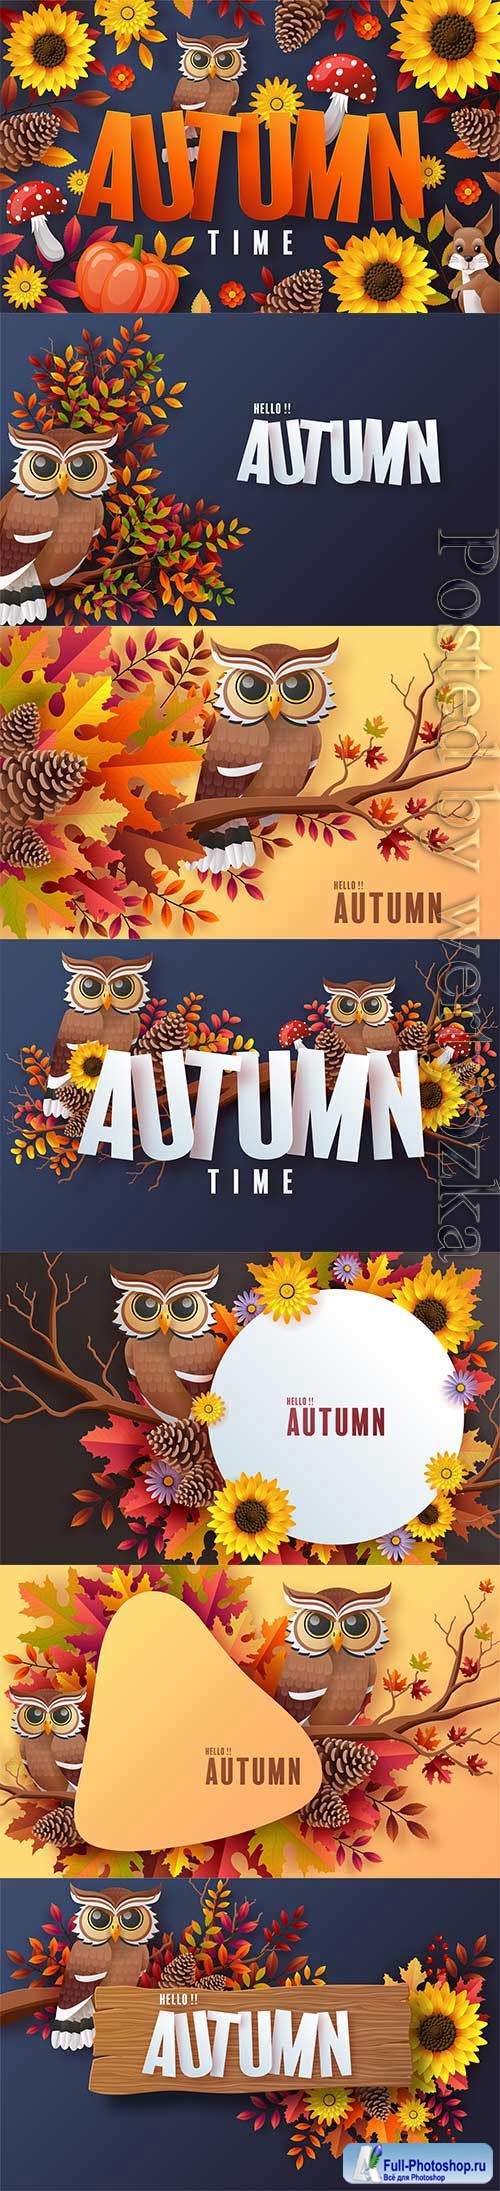 Autumn holiday seasonal vector background with colorful autumn leaves